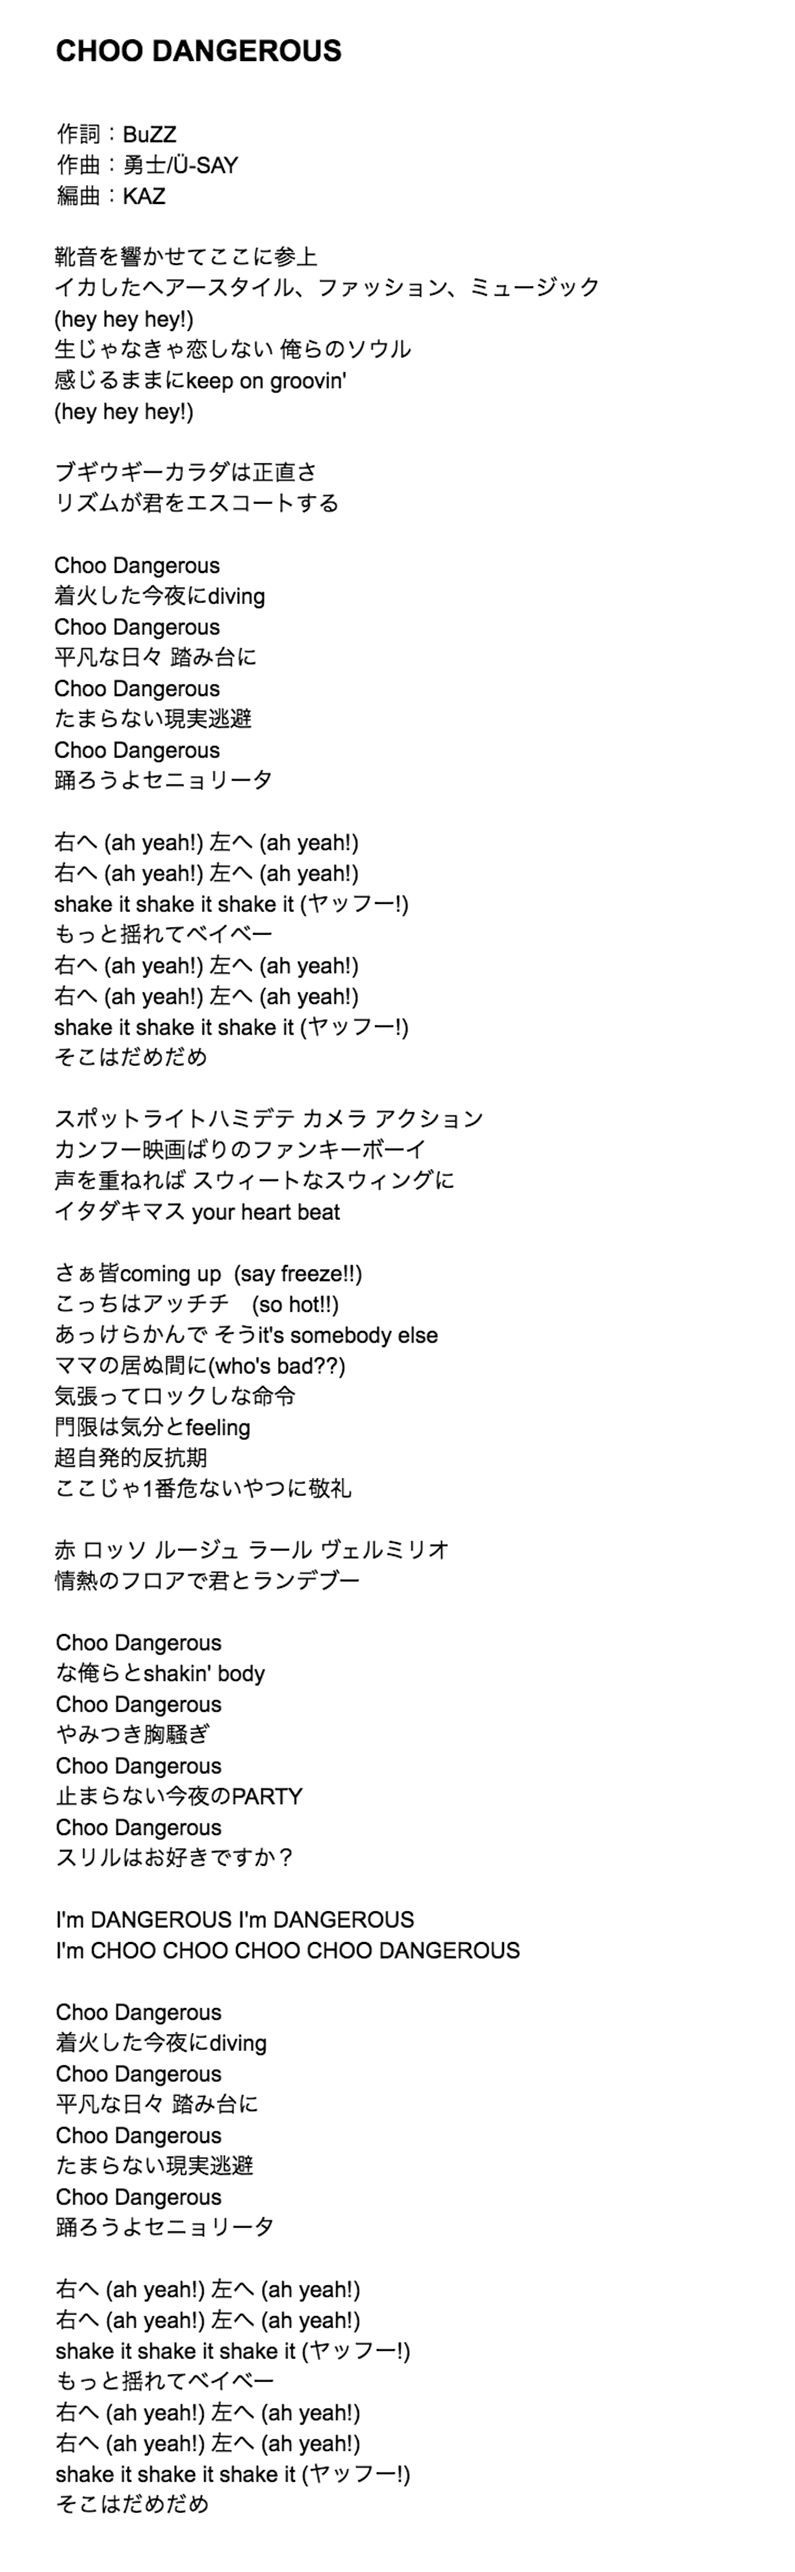 Swing4songs 配信シングル インタビュー 歌詞公開中 Buzz Official Site Official Site